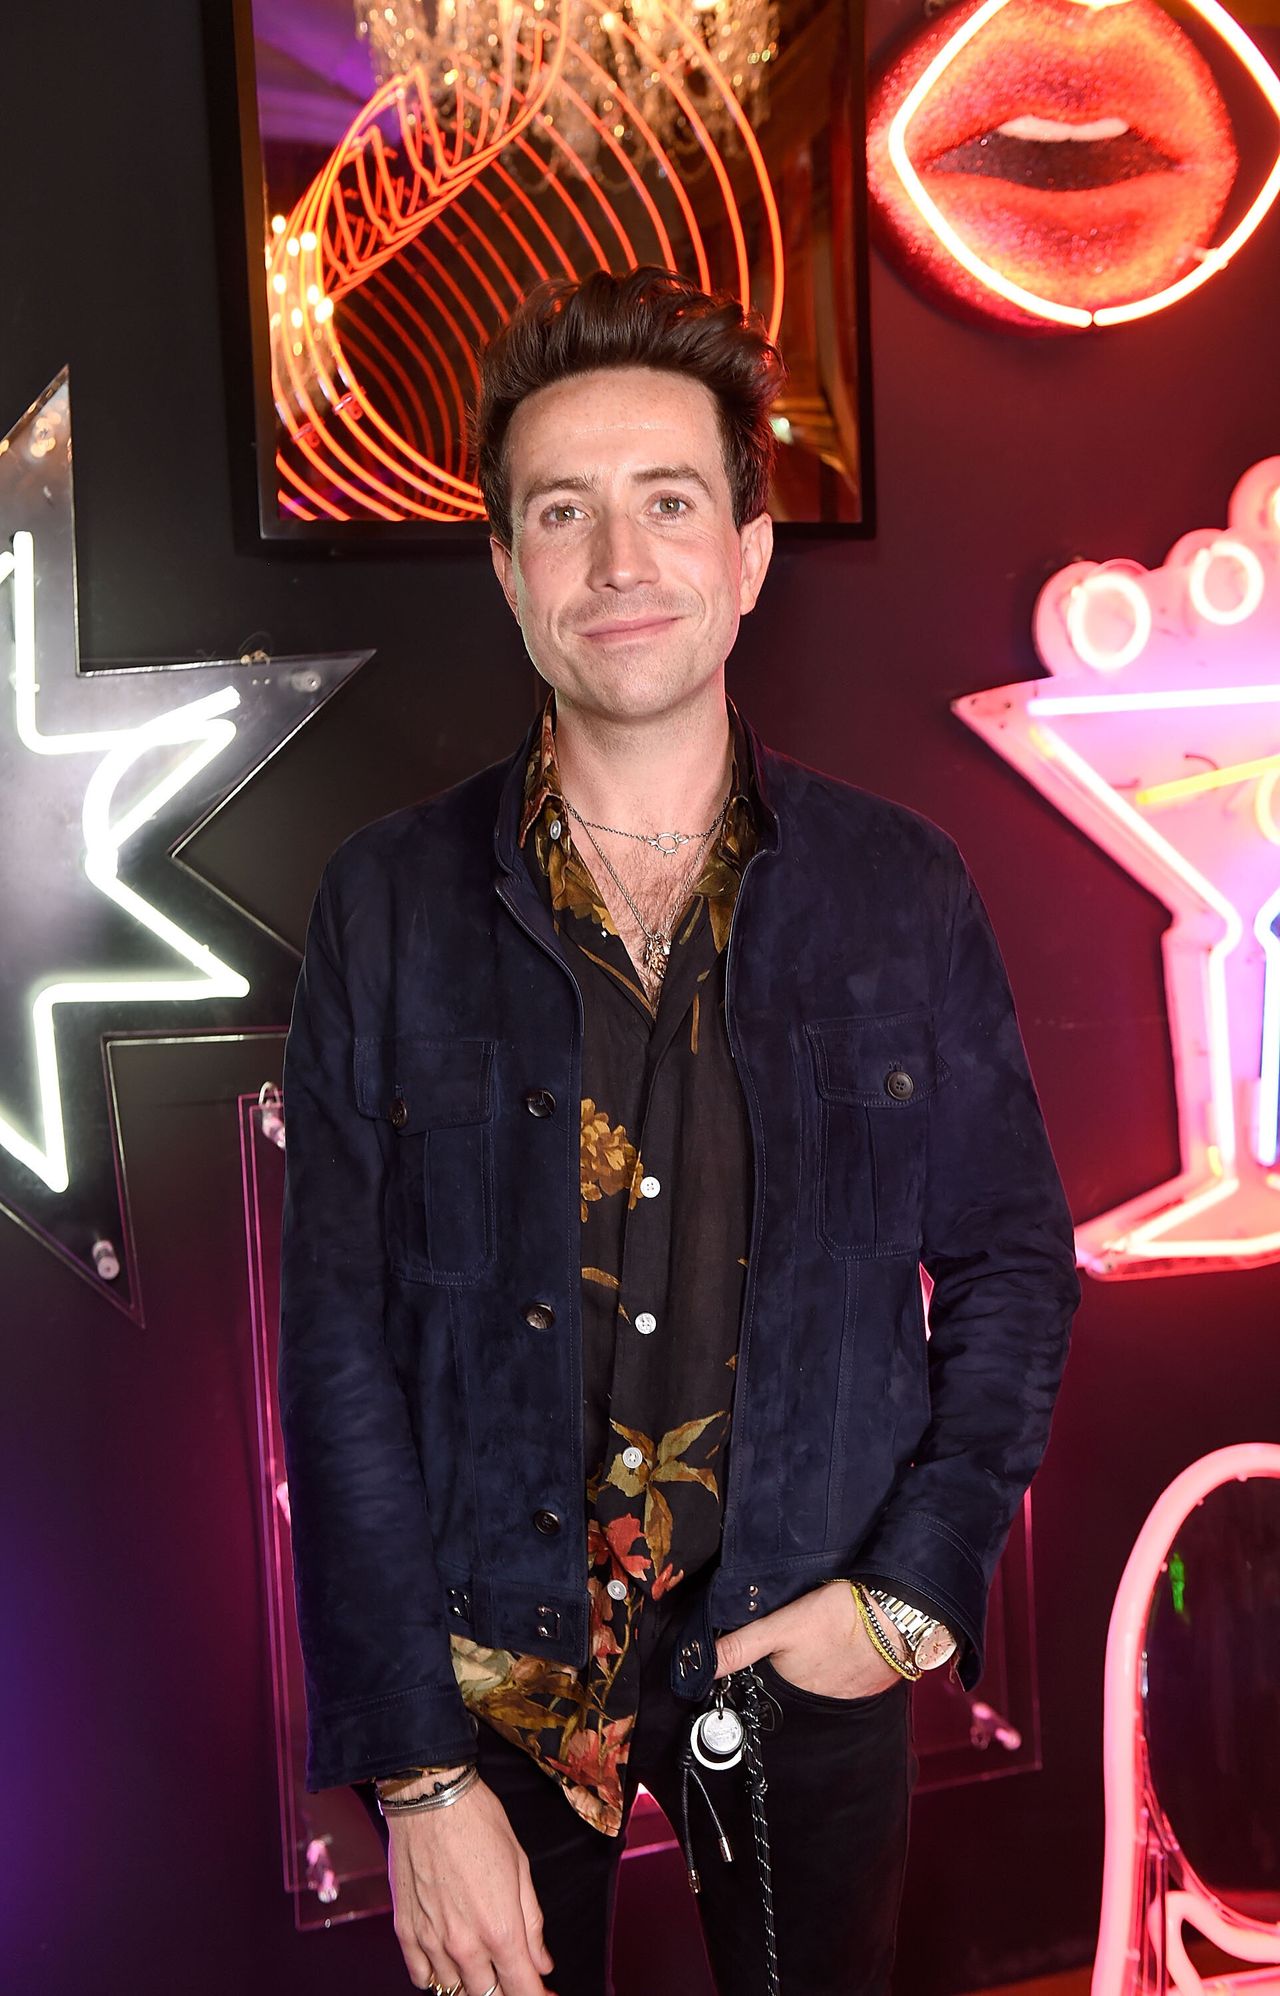 Nick Grimshaw at a Pride event in 2017